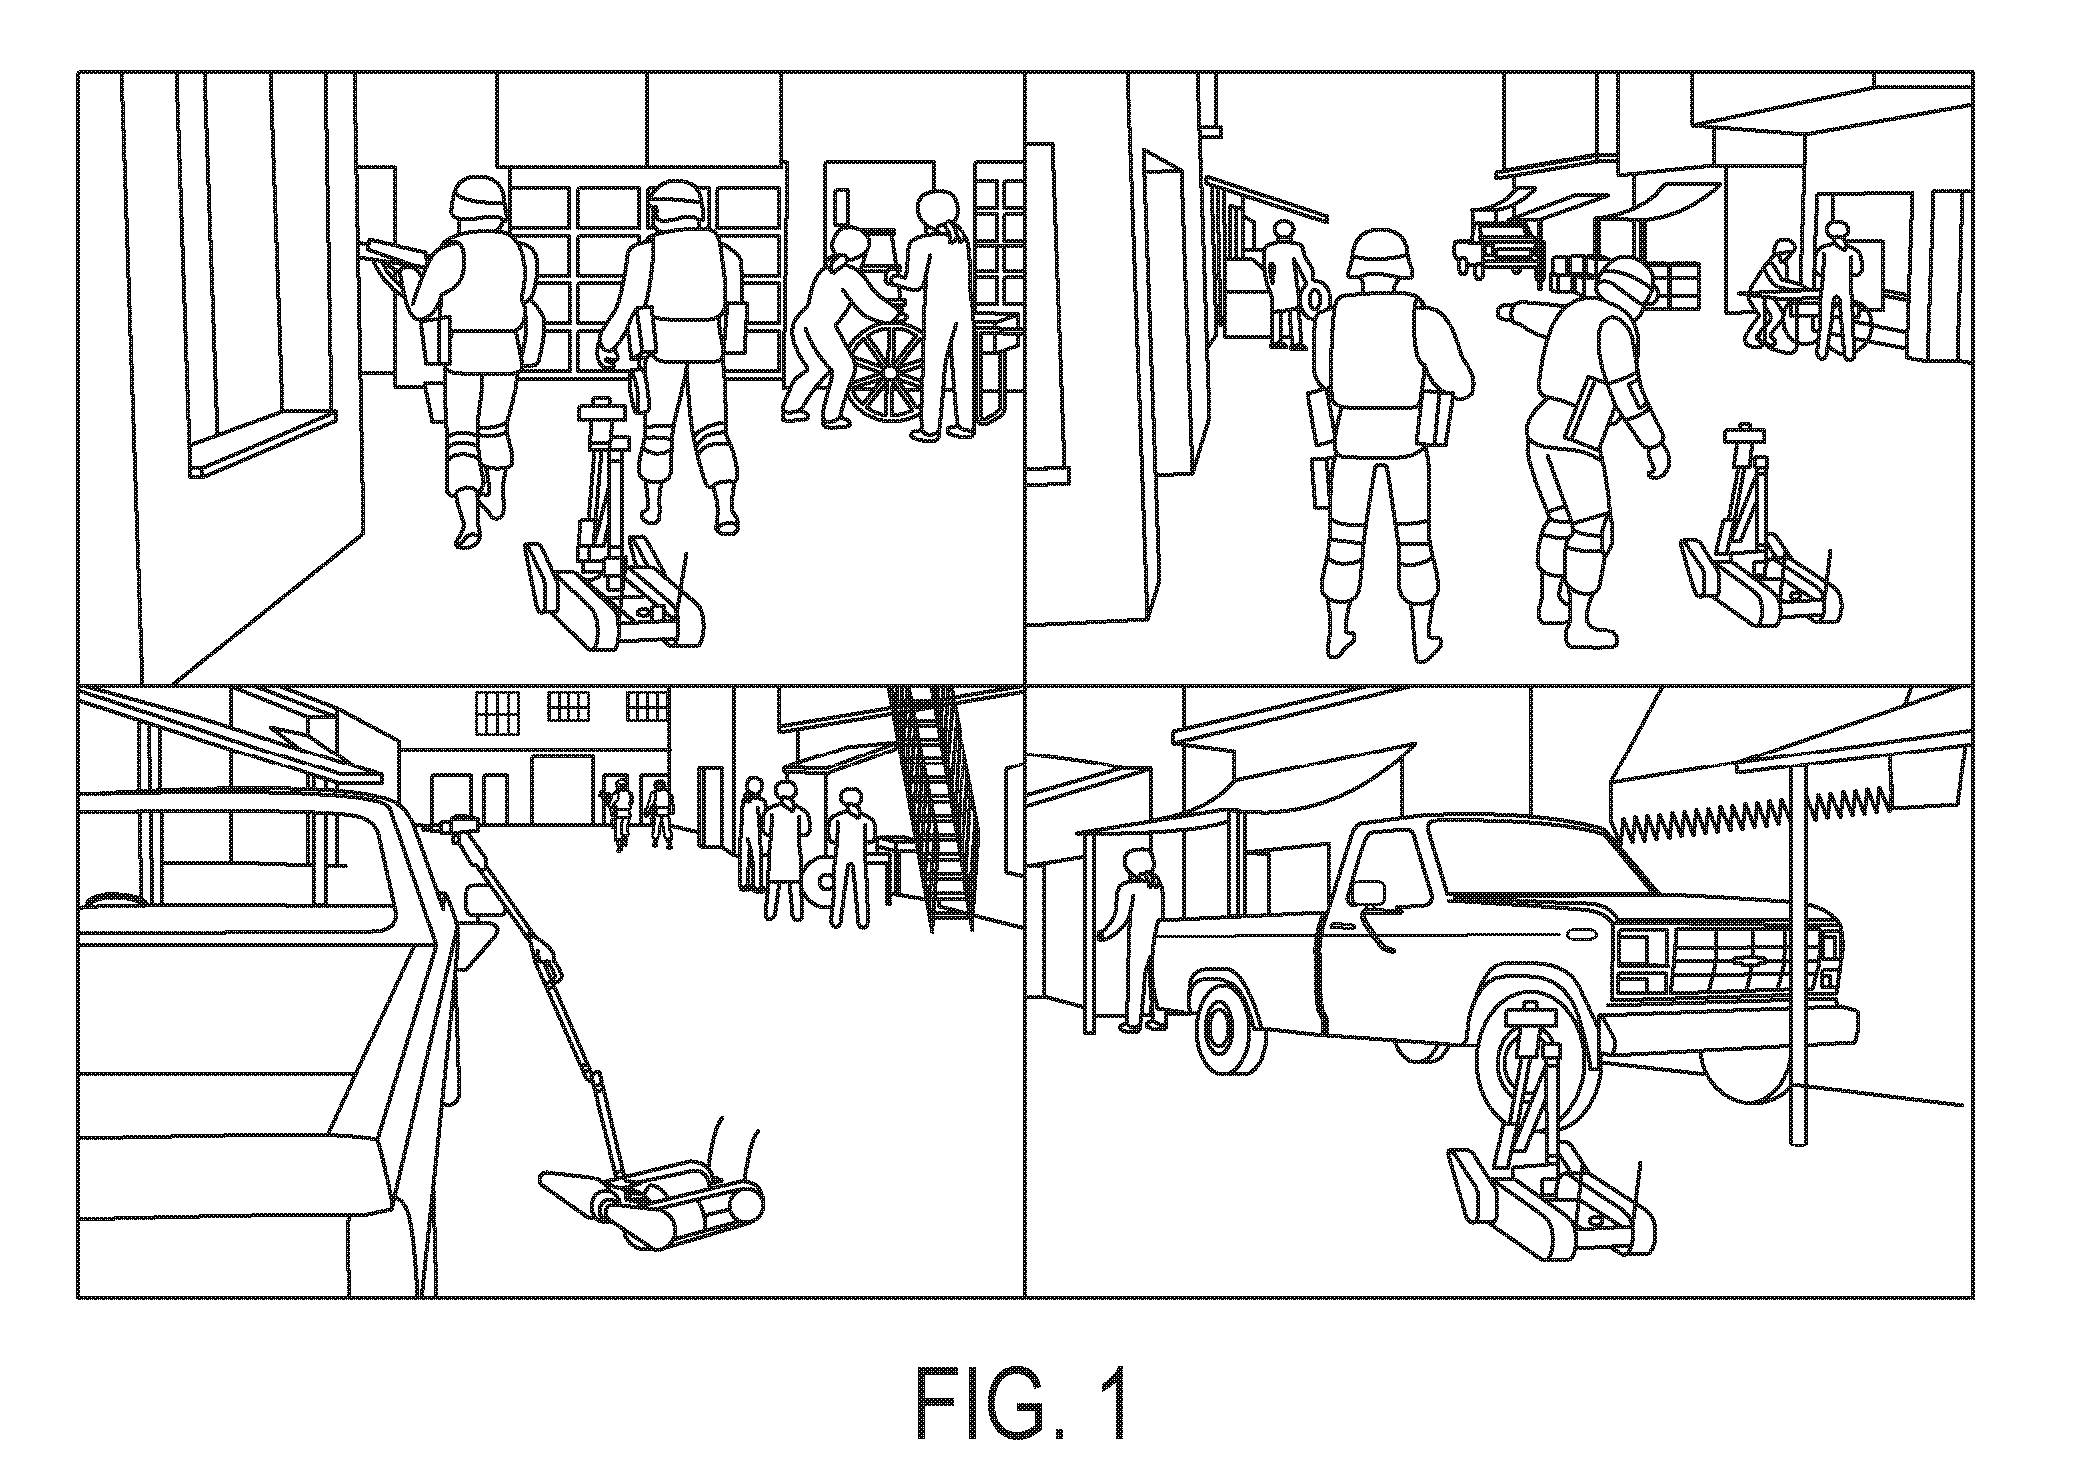 System and method for cooperative remote vehicle behavior